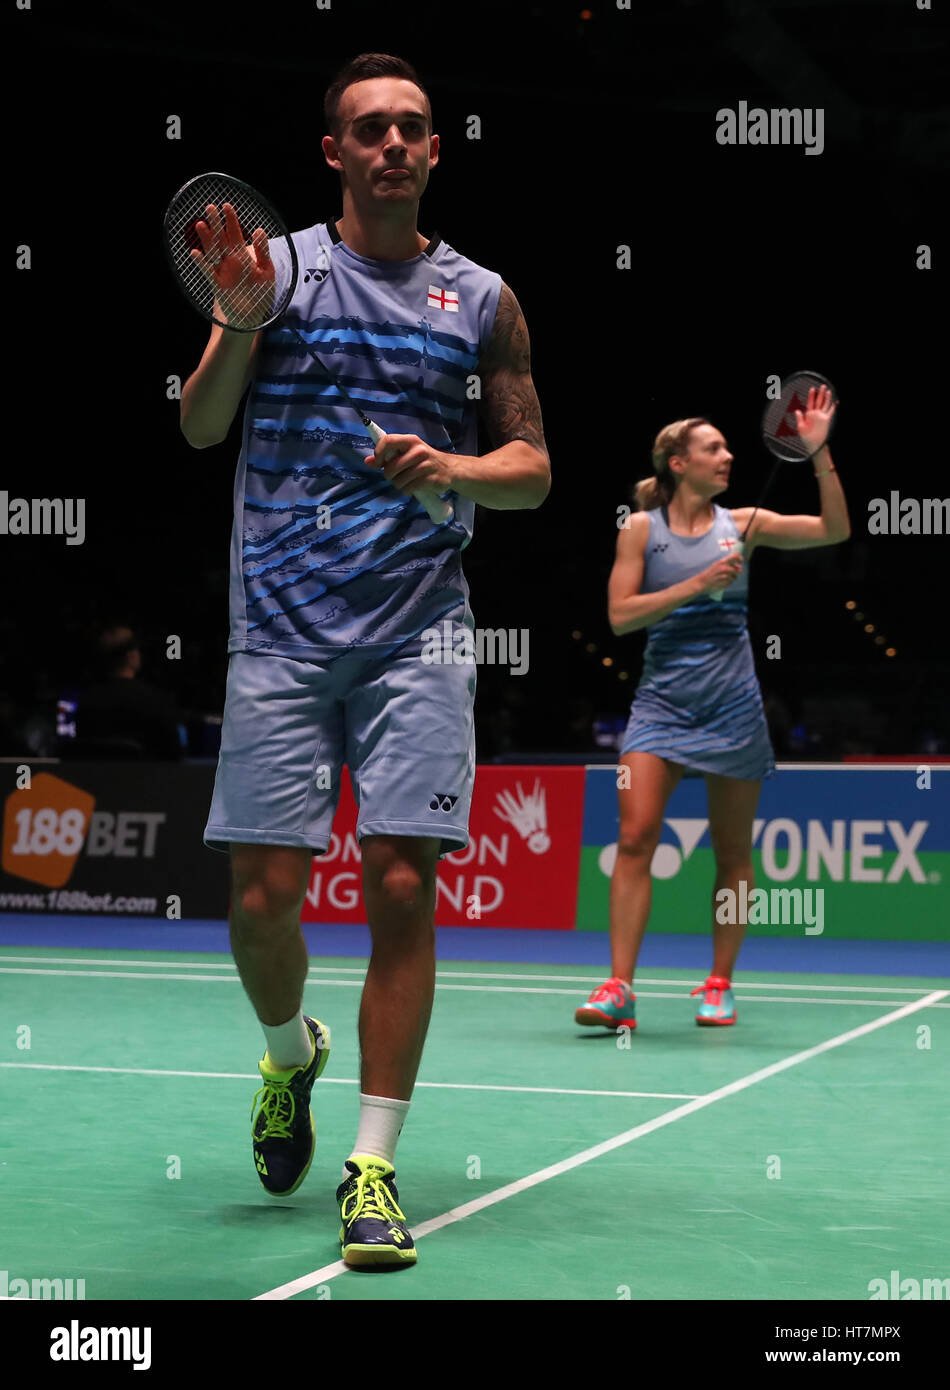 England's Chris Adcock (celebrate) and Gabrielle Adcock after winning their  Mixed doubles match during day two of the YONEX All England Open Badminton  Championships at the Barclaycard Arena, Birmingham Stock Photo -